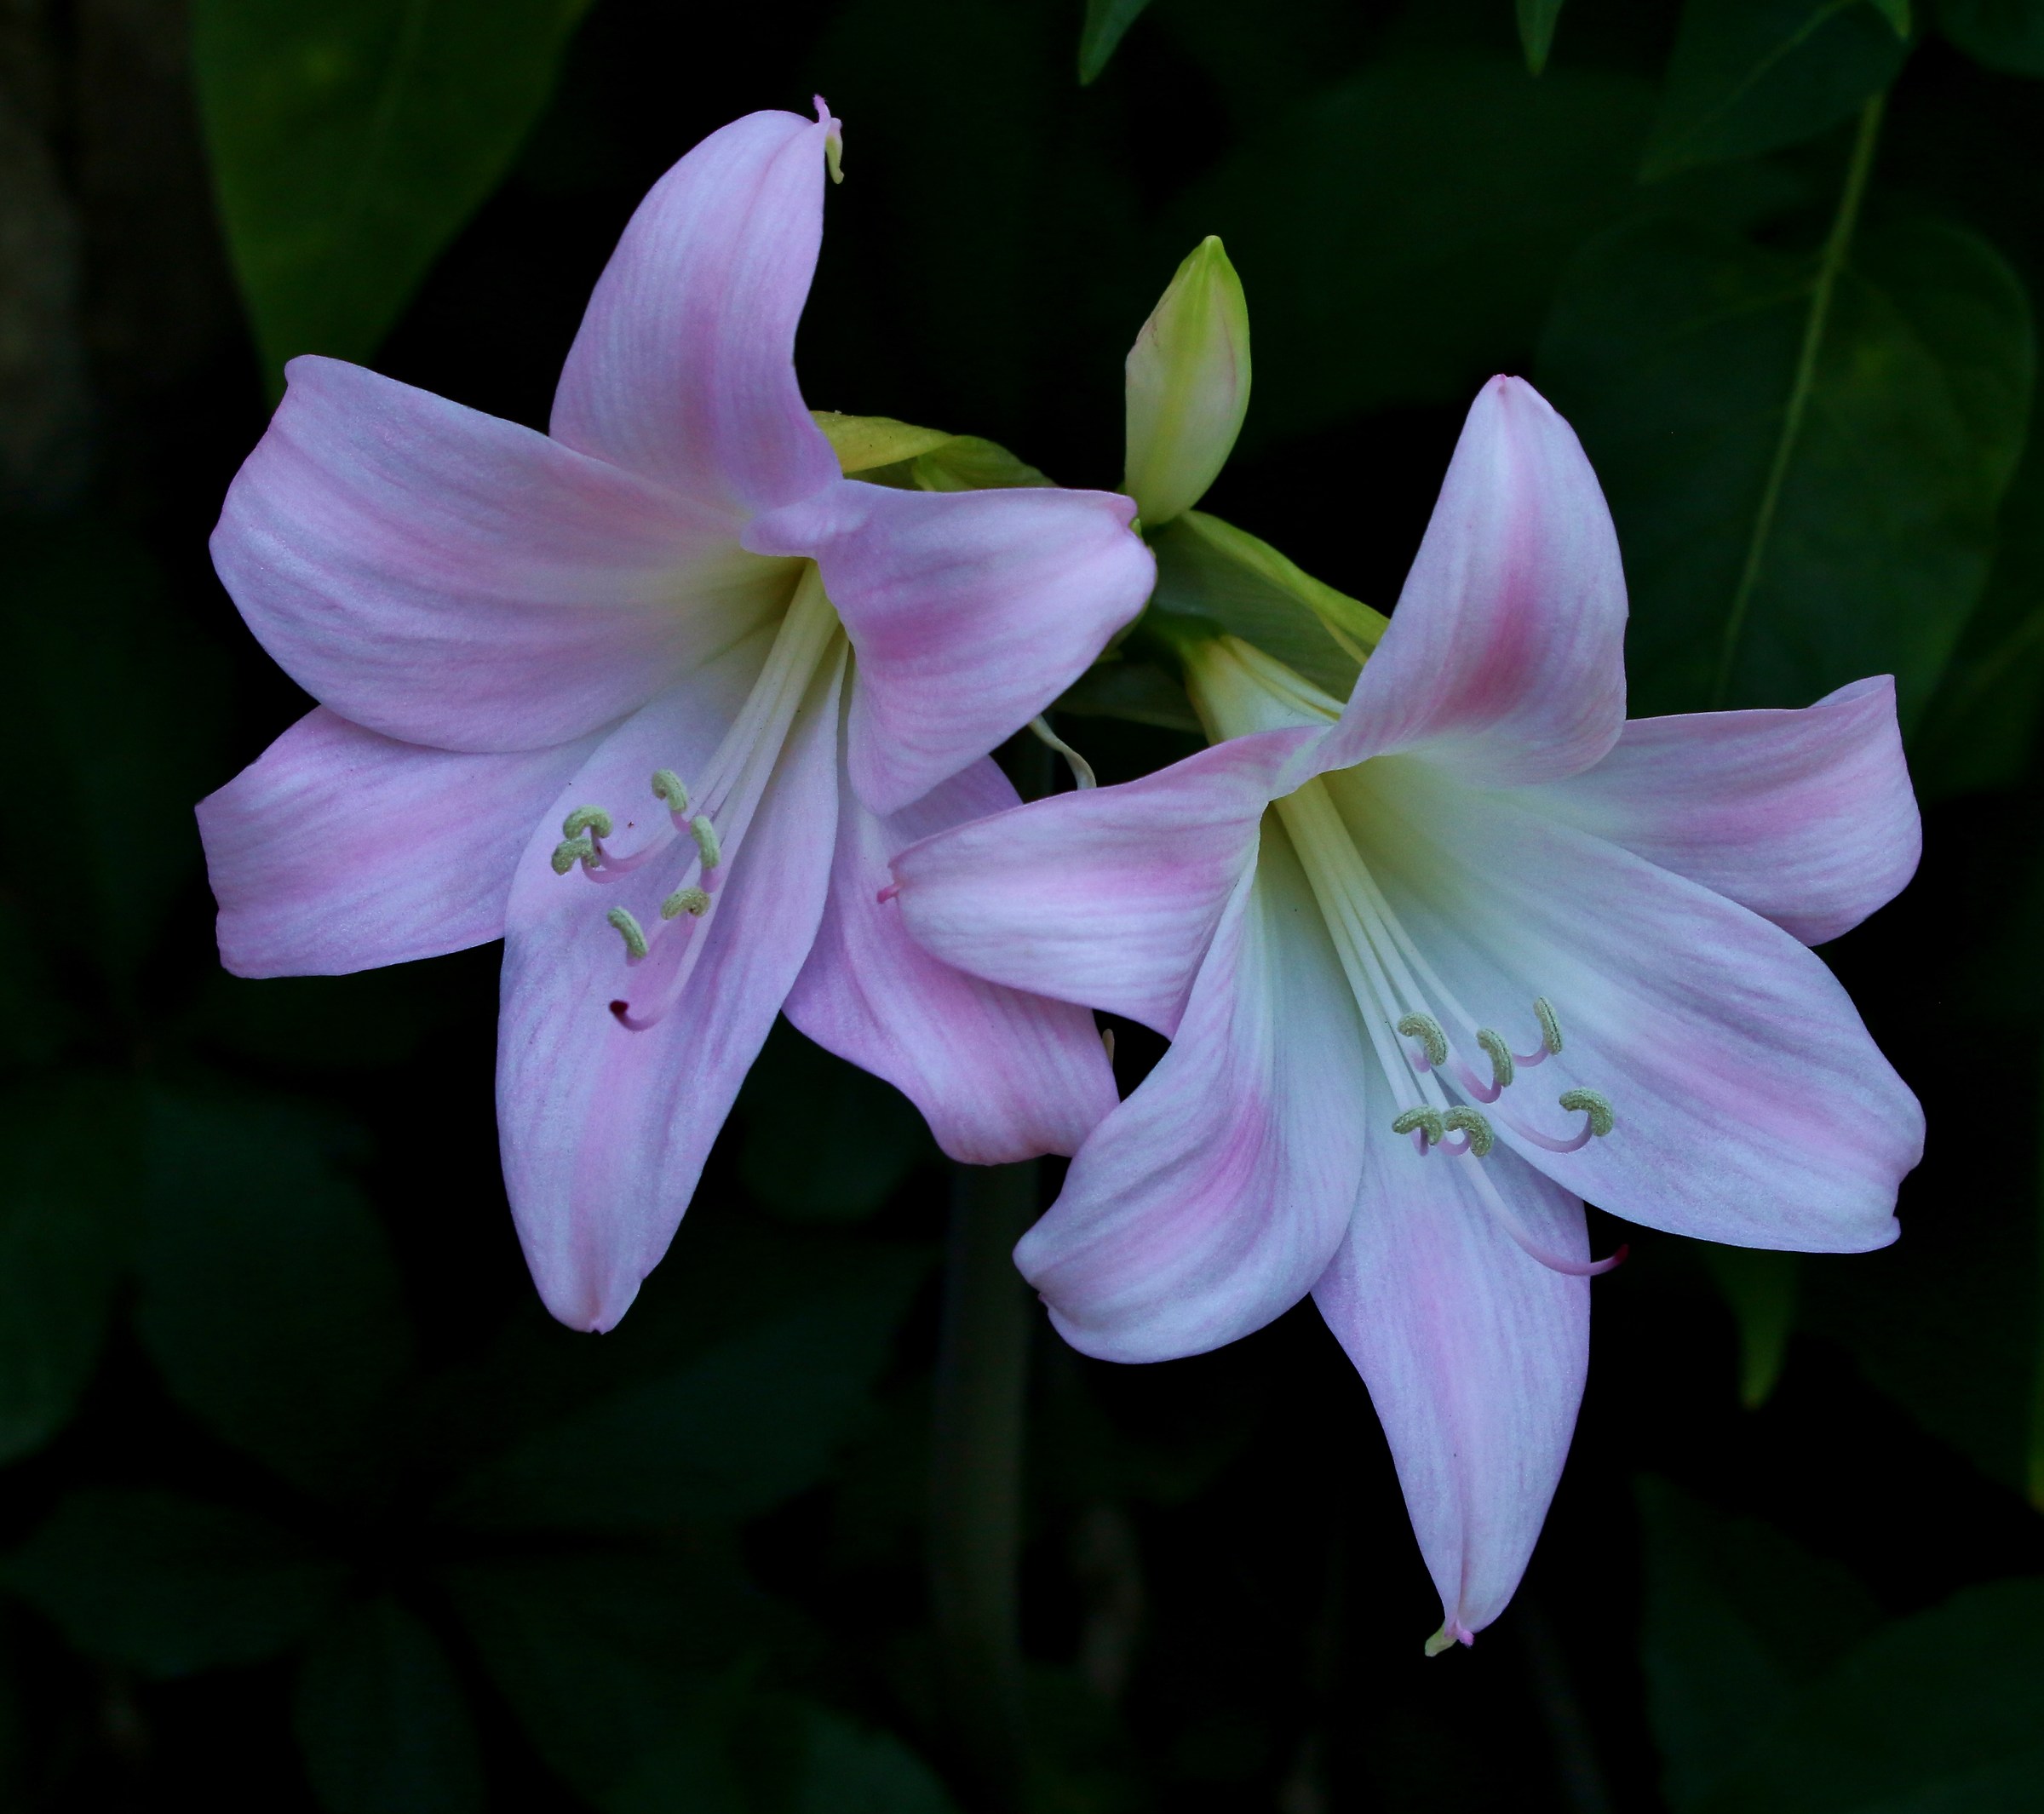 The Lilies...